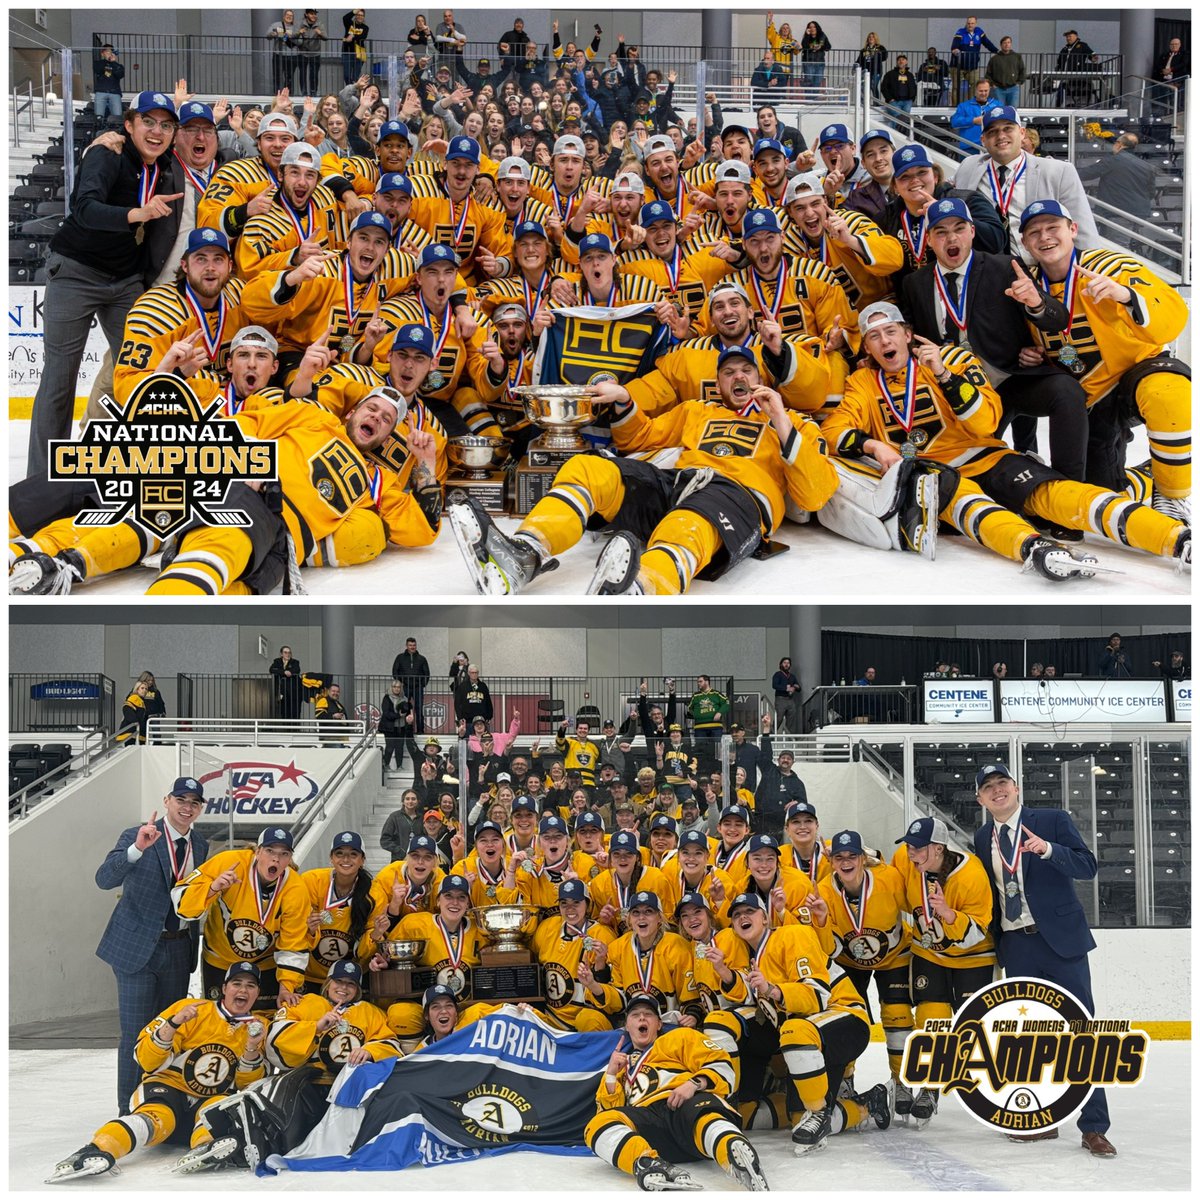 ICYMI!! @AdrianWD1Hockey clinched its 1st National title in program history this past Sunday, just 5 days after @AdrianMD1Hockey clinched its 3rd National title! First time since '10 where the same school has clinched the ACHA title at both levels! #BulldogProud #ACHA #GDTBAB